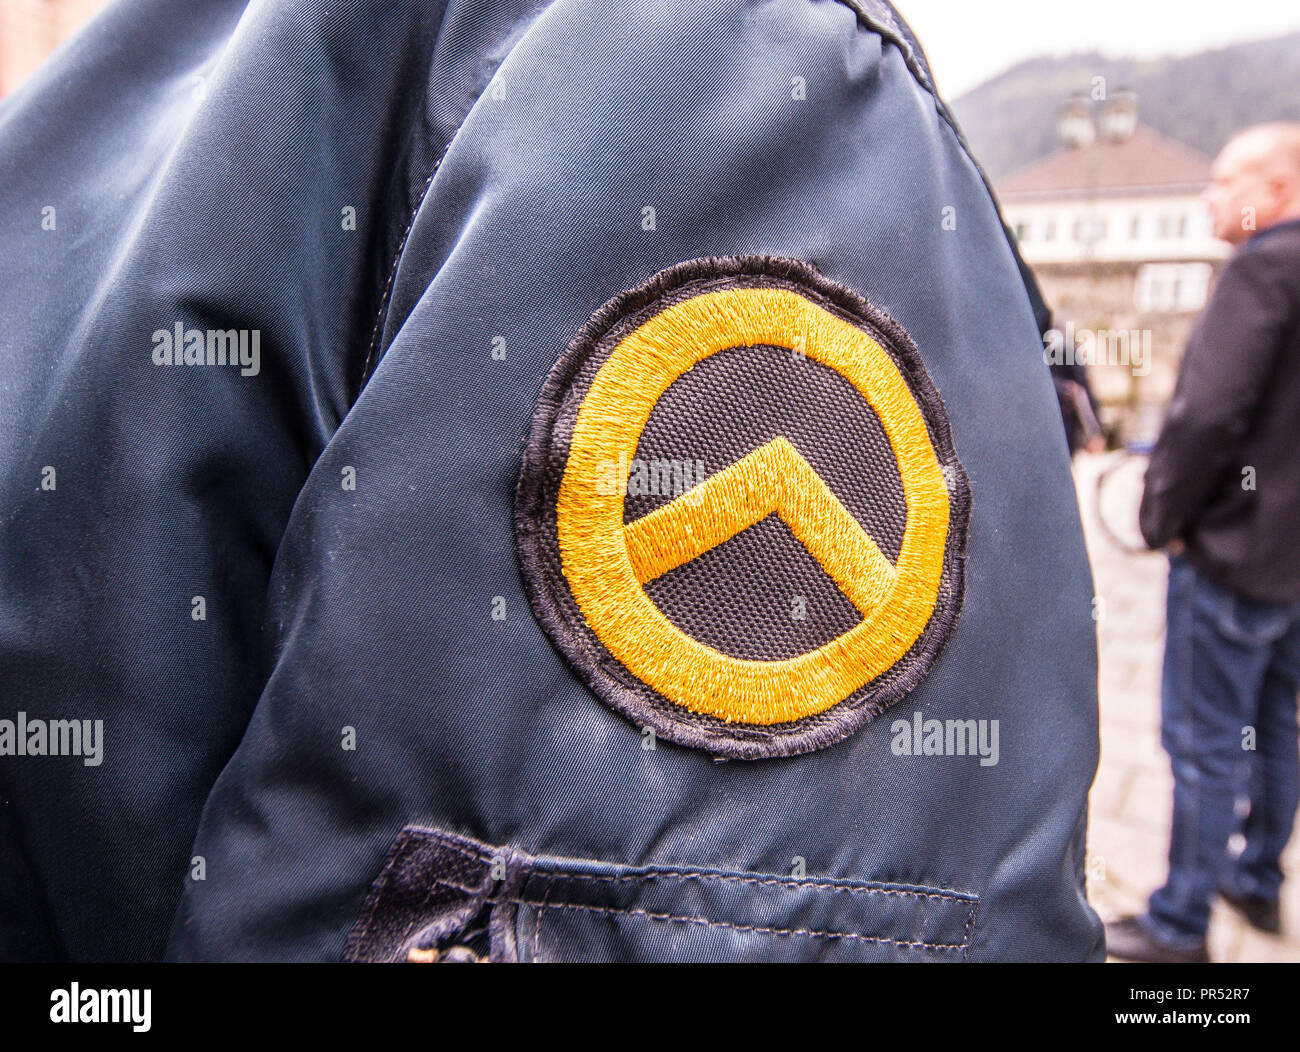 Garmisch Partenkirchen, Bavaria, Germany. 29th Sep, 2018. Logo of the Identitaere Bewegung worn by a person that appeared to be working in a security capacity at the Compact Konferenz in Garmisch Partenkirchen. Adding themselves to the "who's who"" list of of several hundred right-extremists from Germany, Austria, Switzerland, and other countries, Tommy Robinson, founder of the British EDL, Lutz Bachmann, grounder of Germany's Pegida, and Martin Sellner of the Identitaere Bewegung were guests as the Compact Konferenz held in the international tourist town of Garmisch Partenkirchen Stock Photo